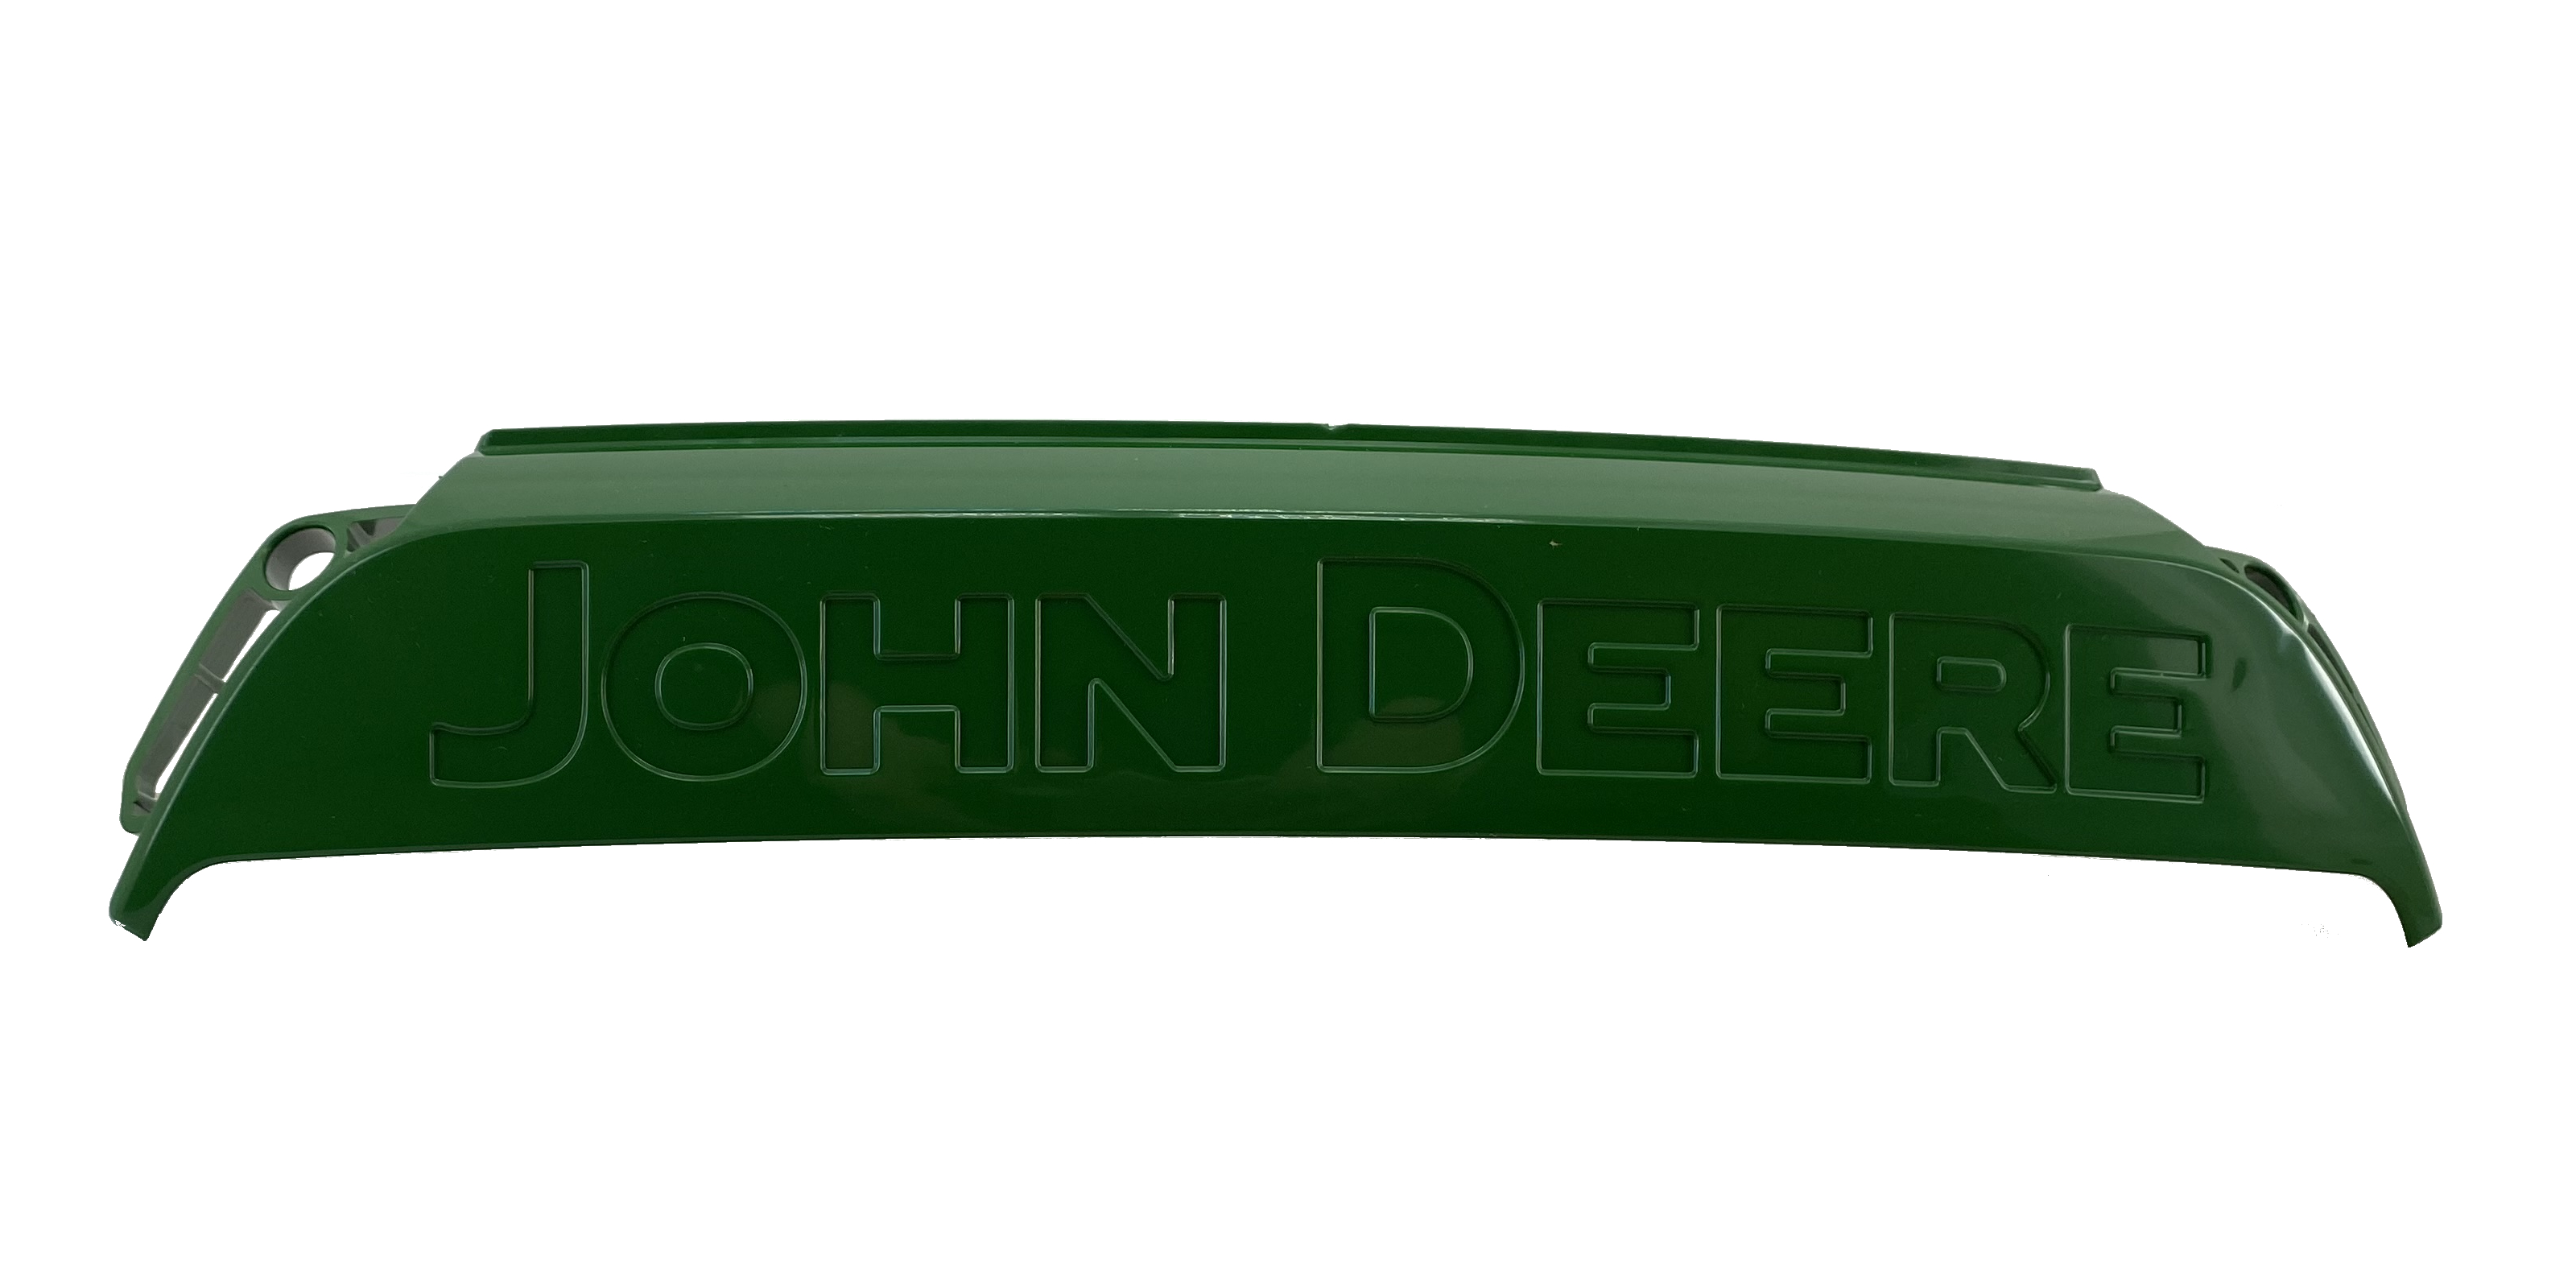 John Deere X300 Tractor Bumper Cover Ship M168890 for sale online 